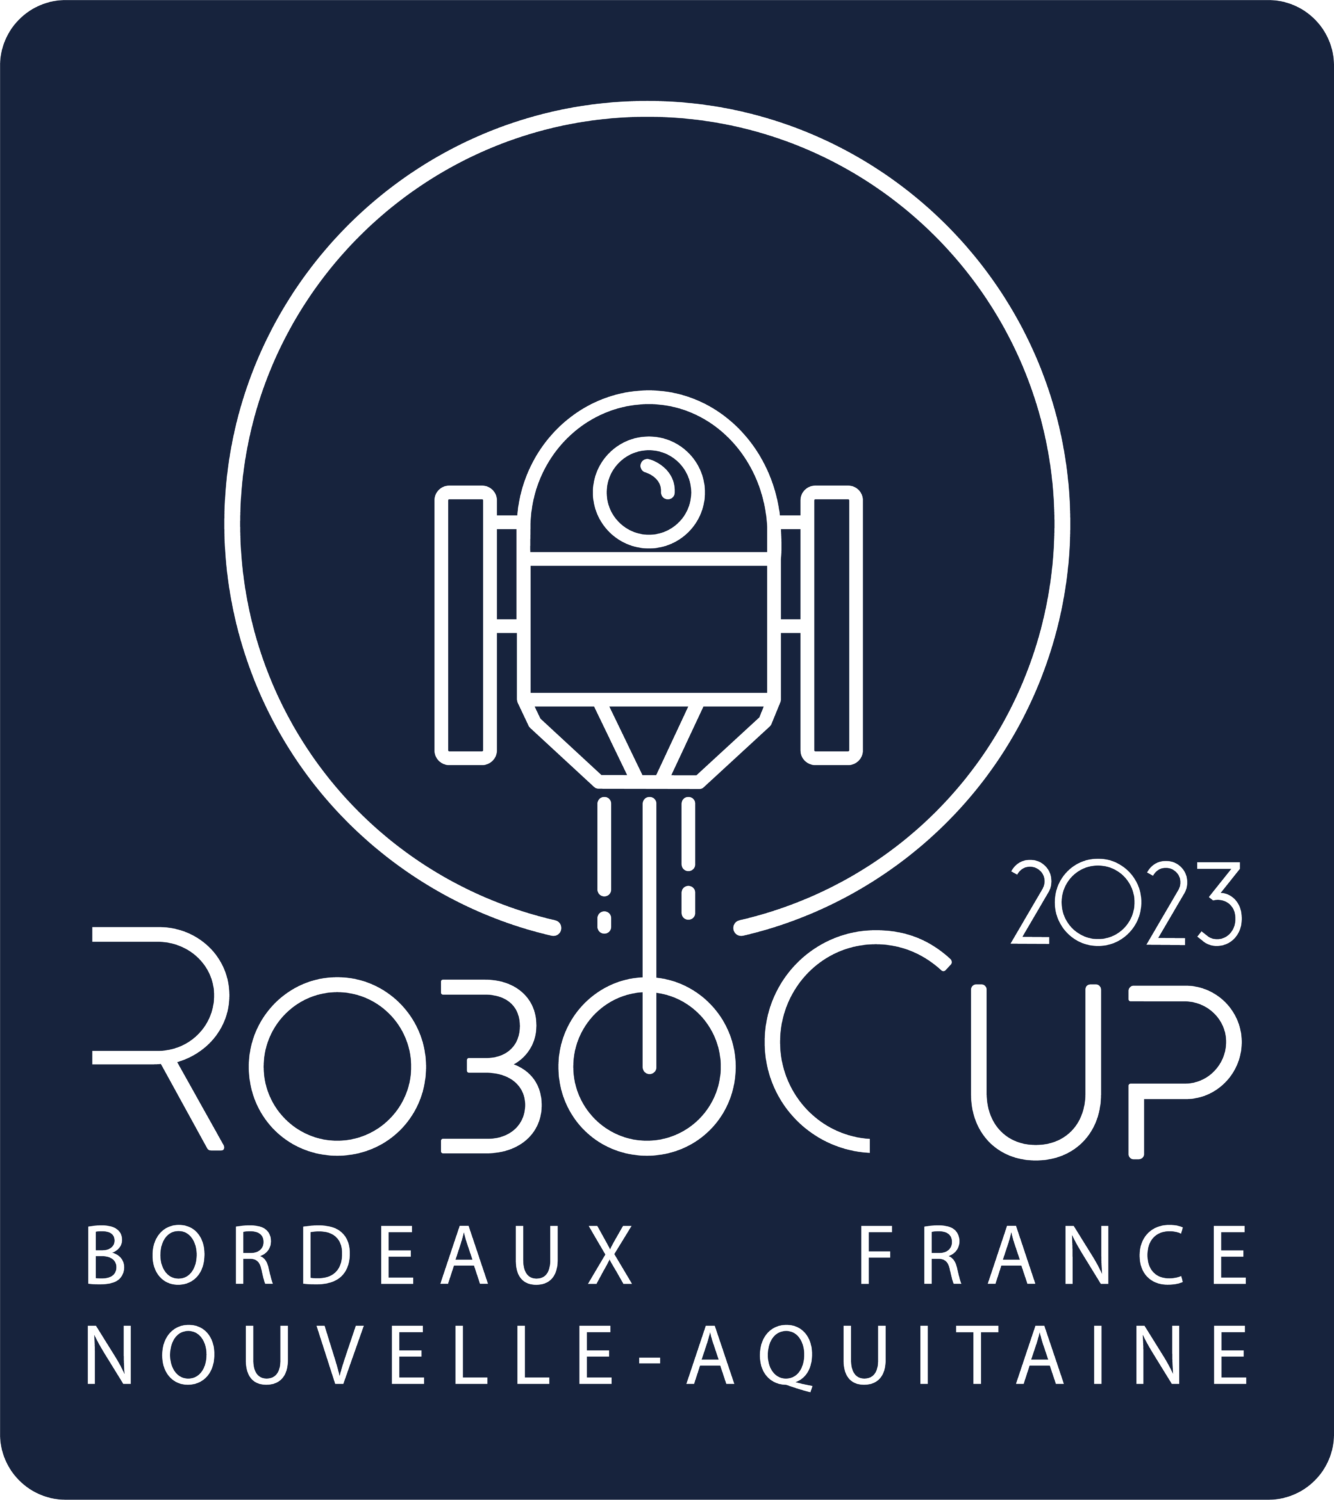 What’s coming up at #RoboCup2023?